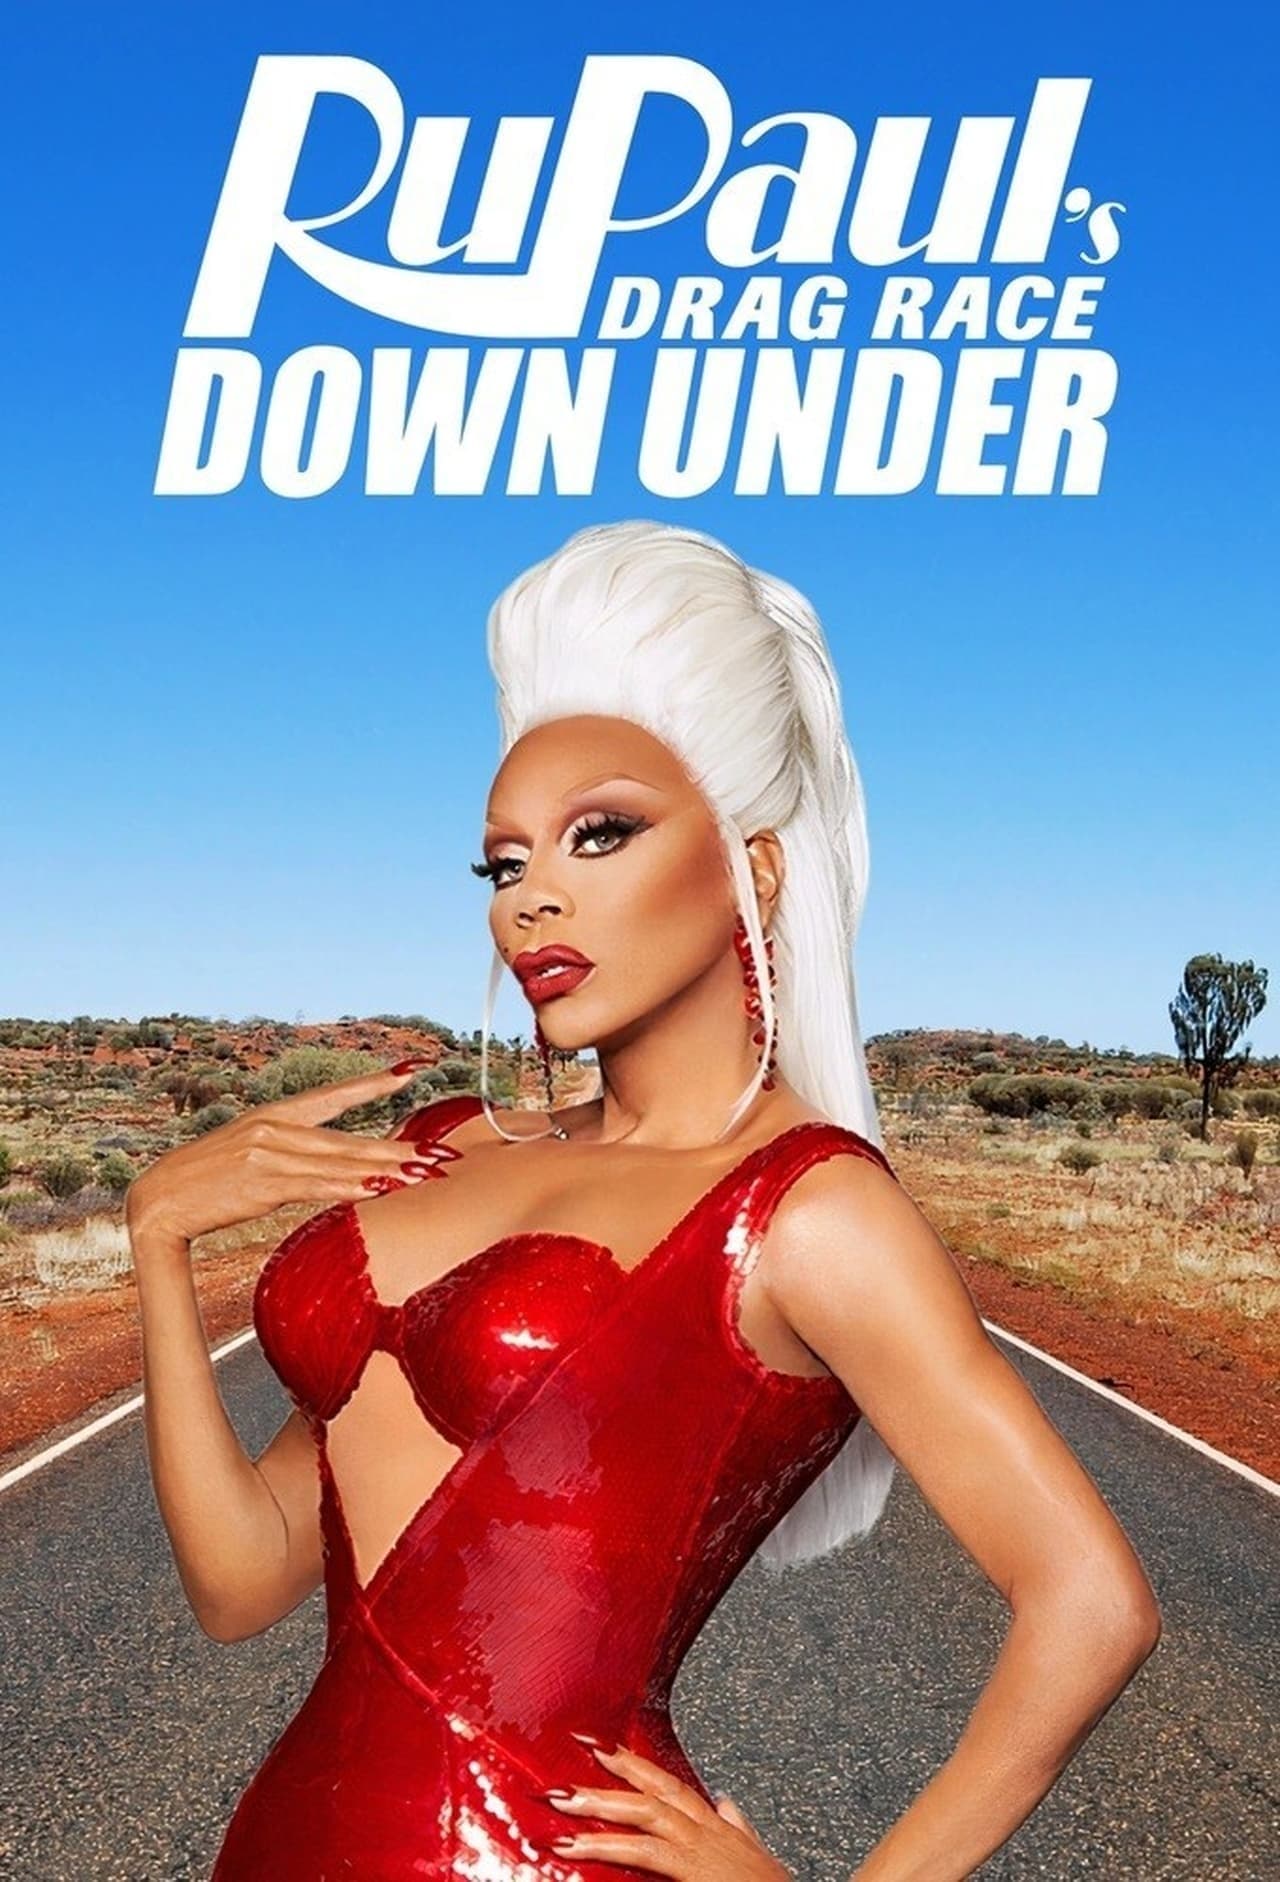 RuPaul's Drag Race Down Under TV Shows About Queen